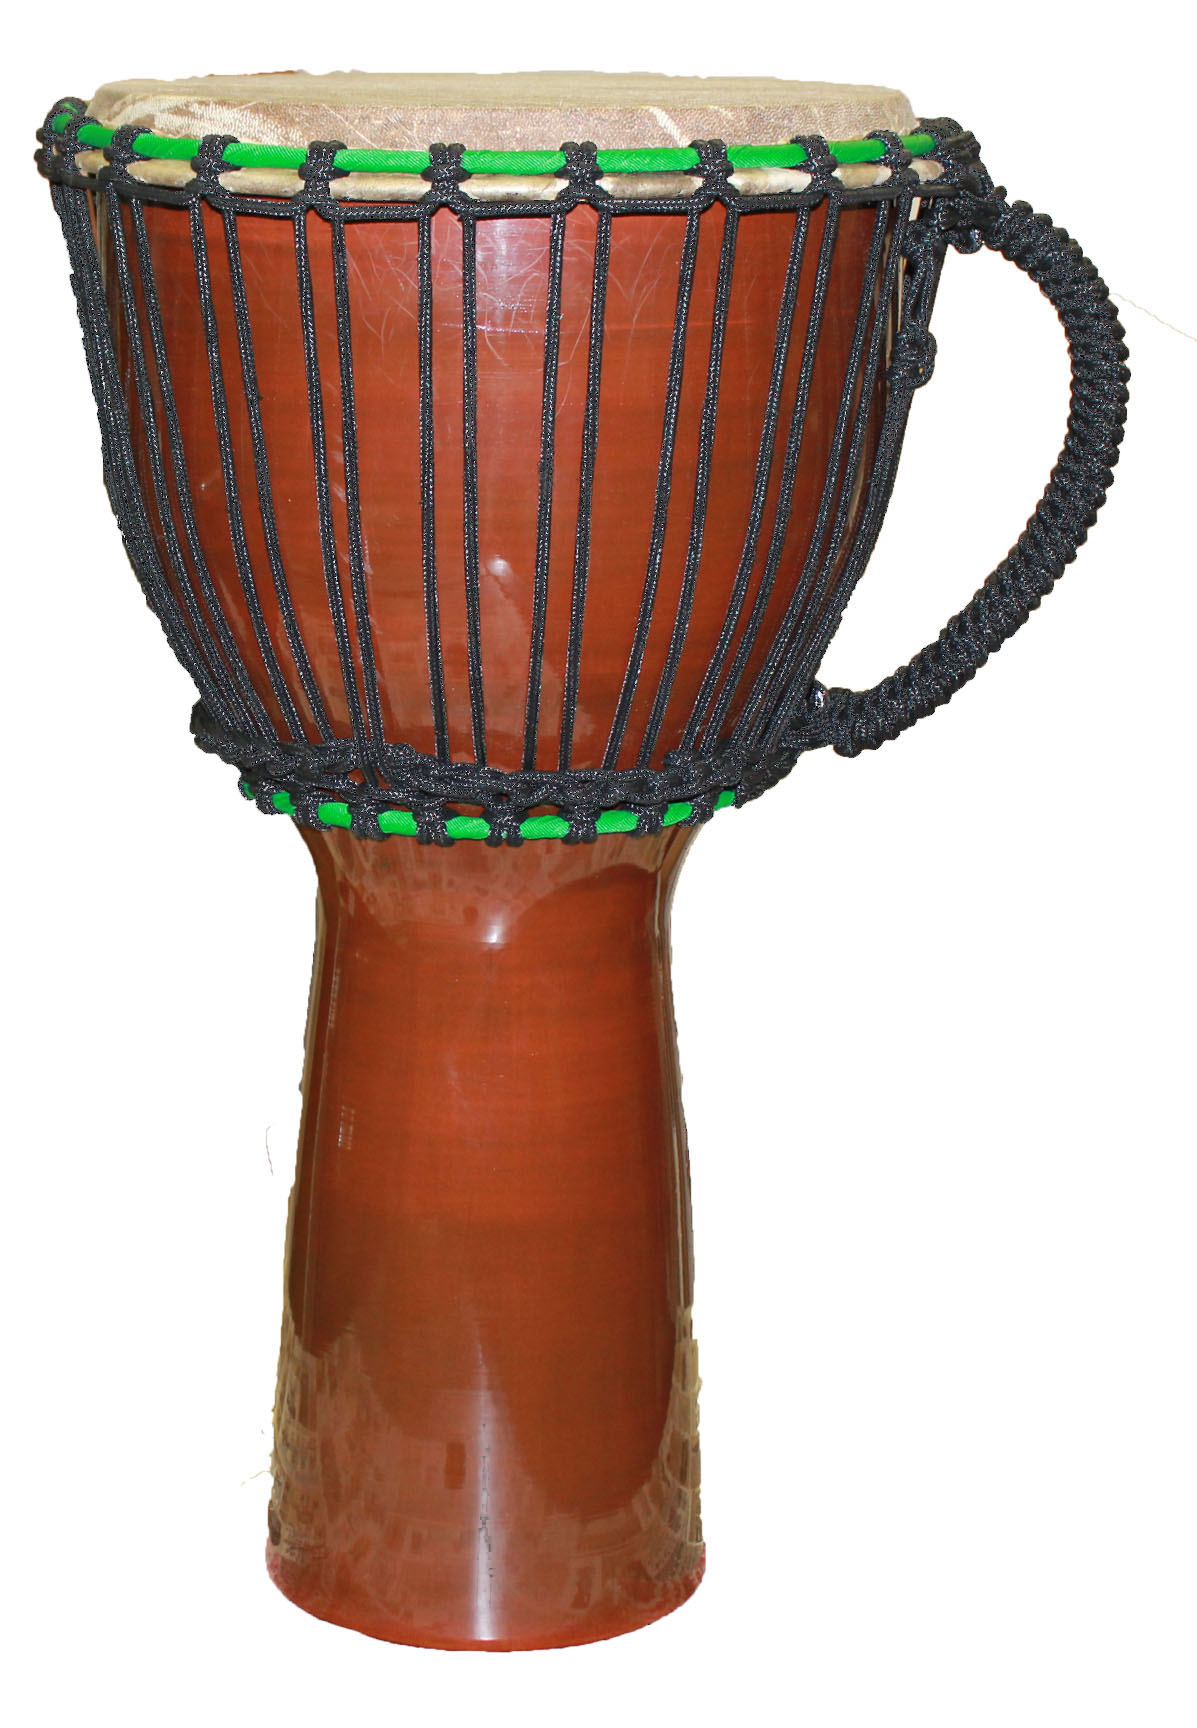 Djembe picture